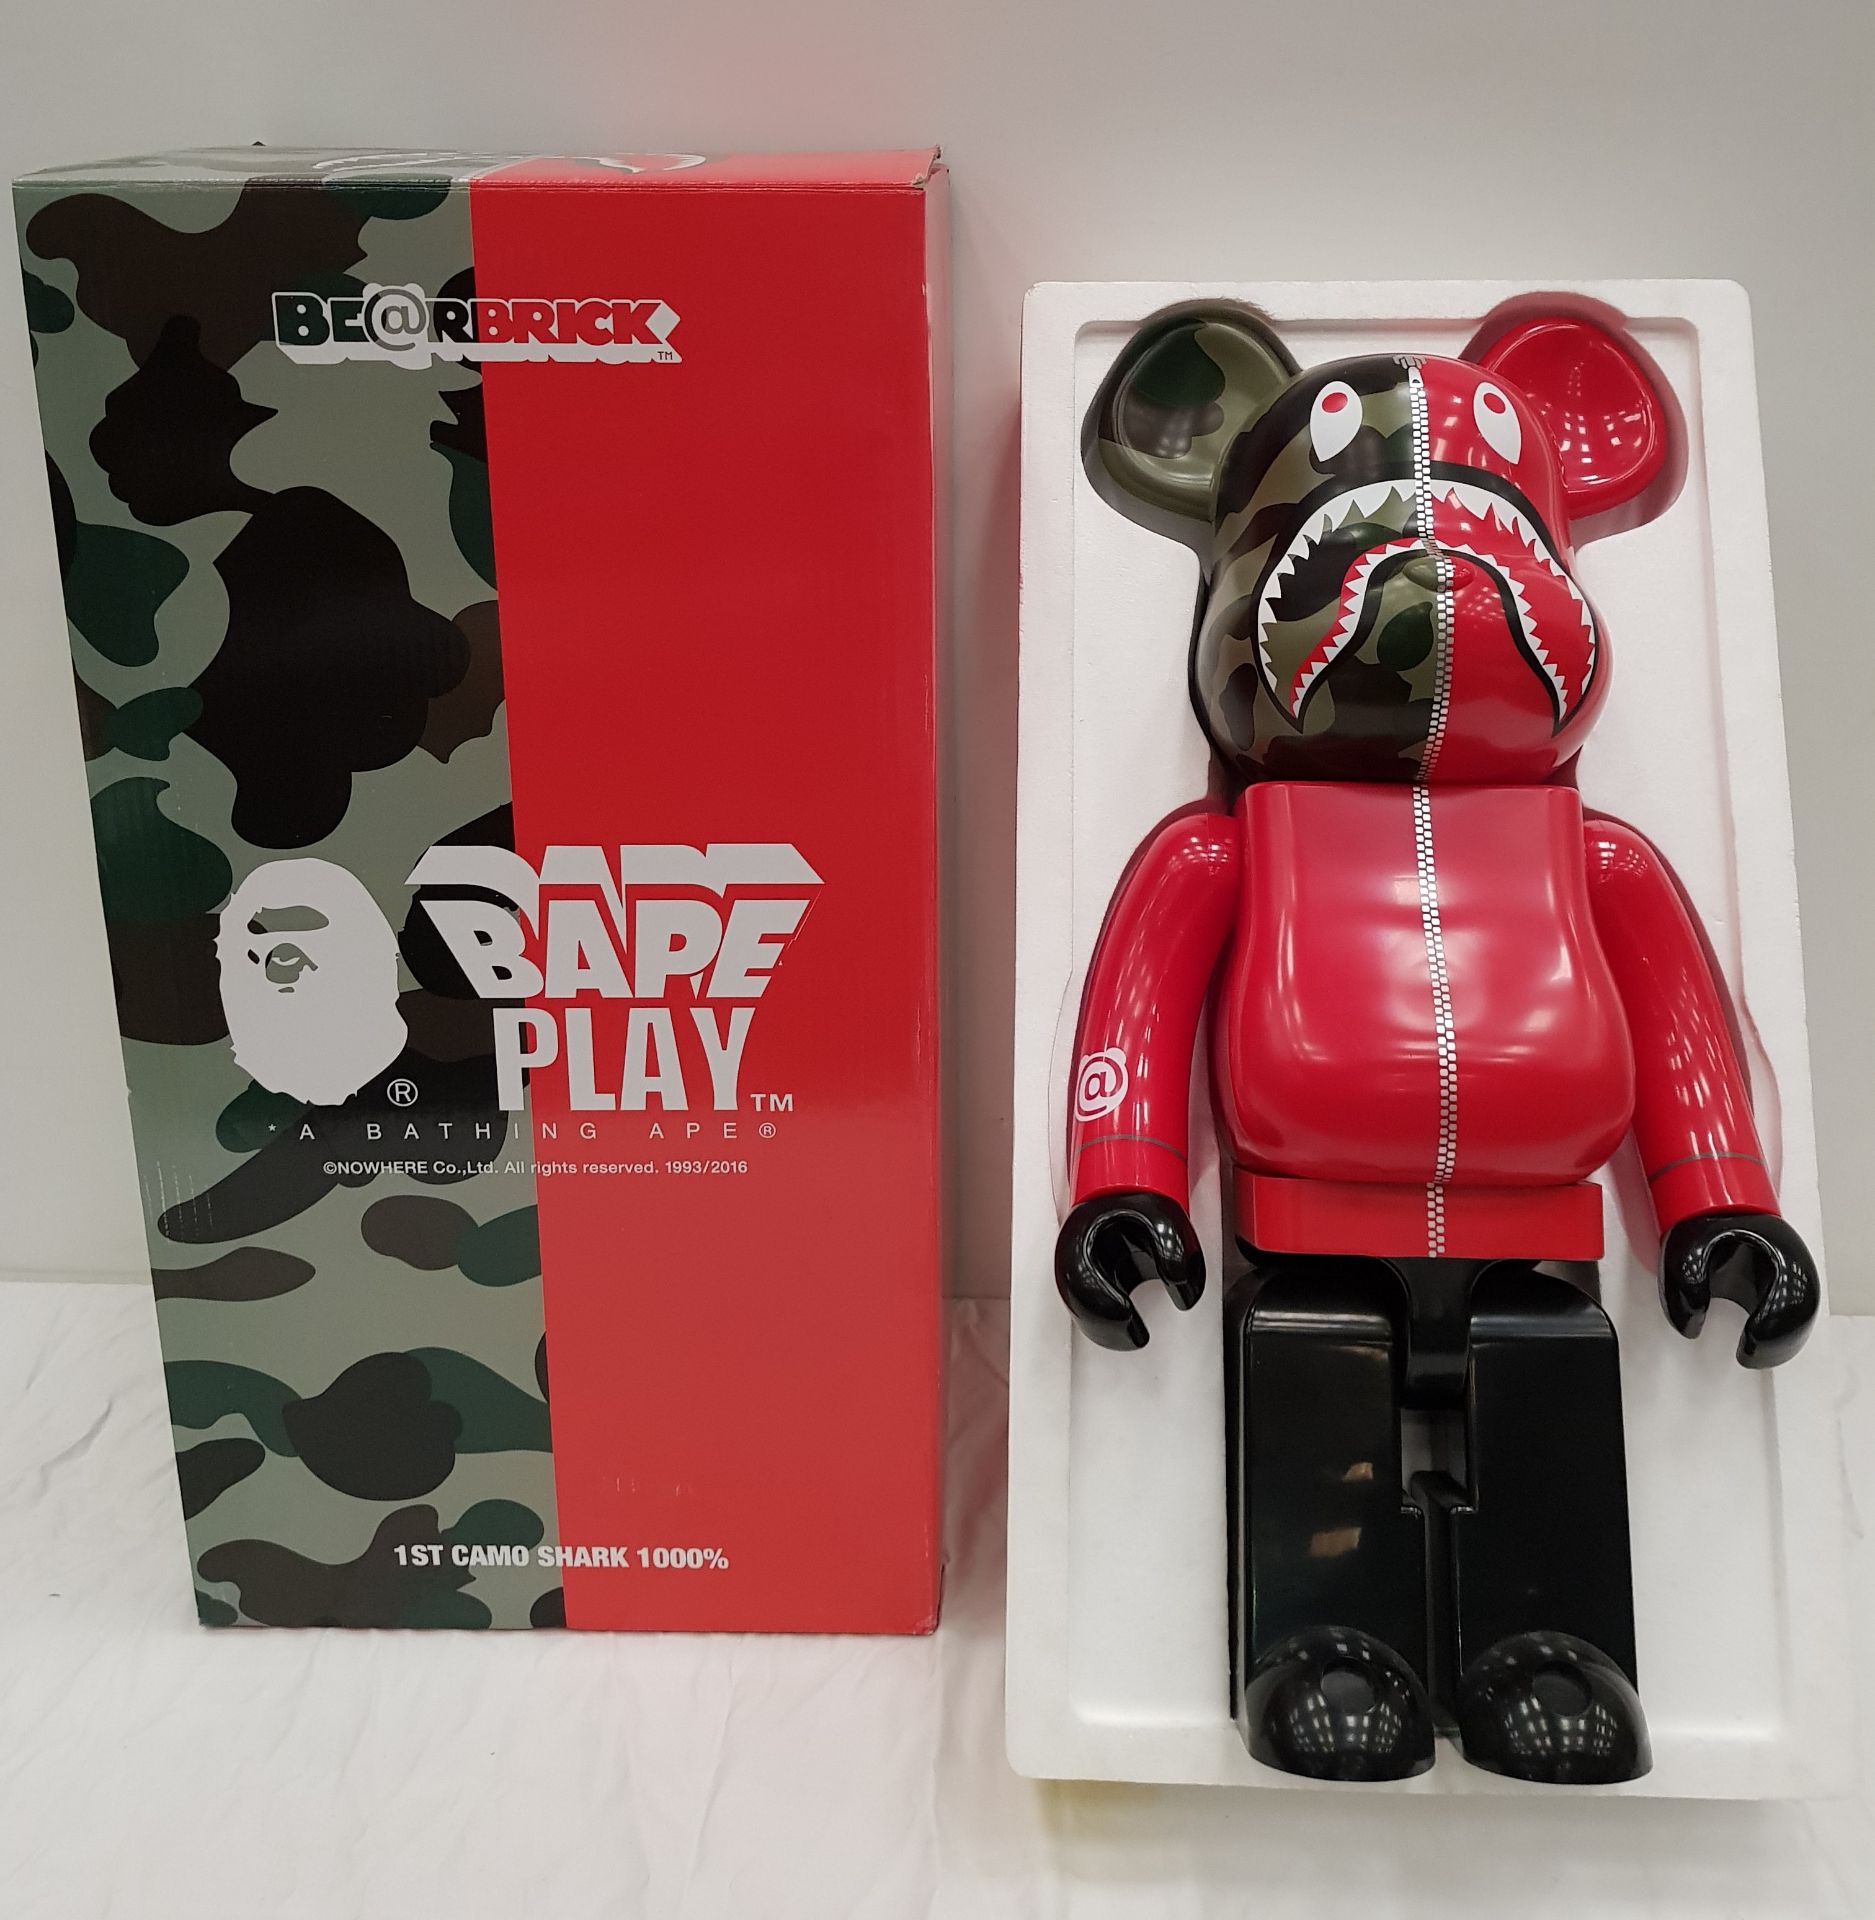 1 X BOXED BEARBRICK A BATHING APE 1ST CAMO SHARK RED 1000% - COLLECTABLE ART FIGURES - 70 CM HEIGHT